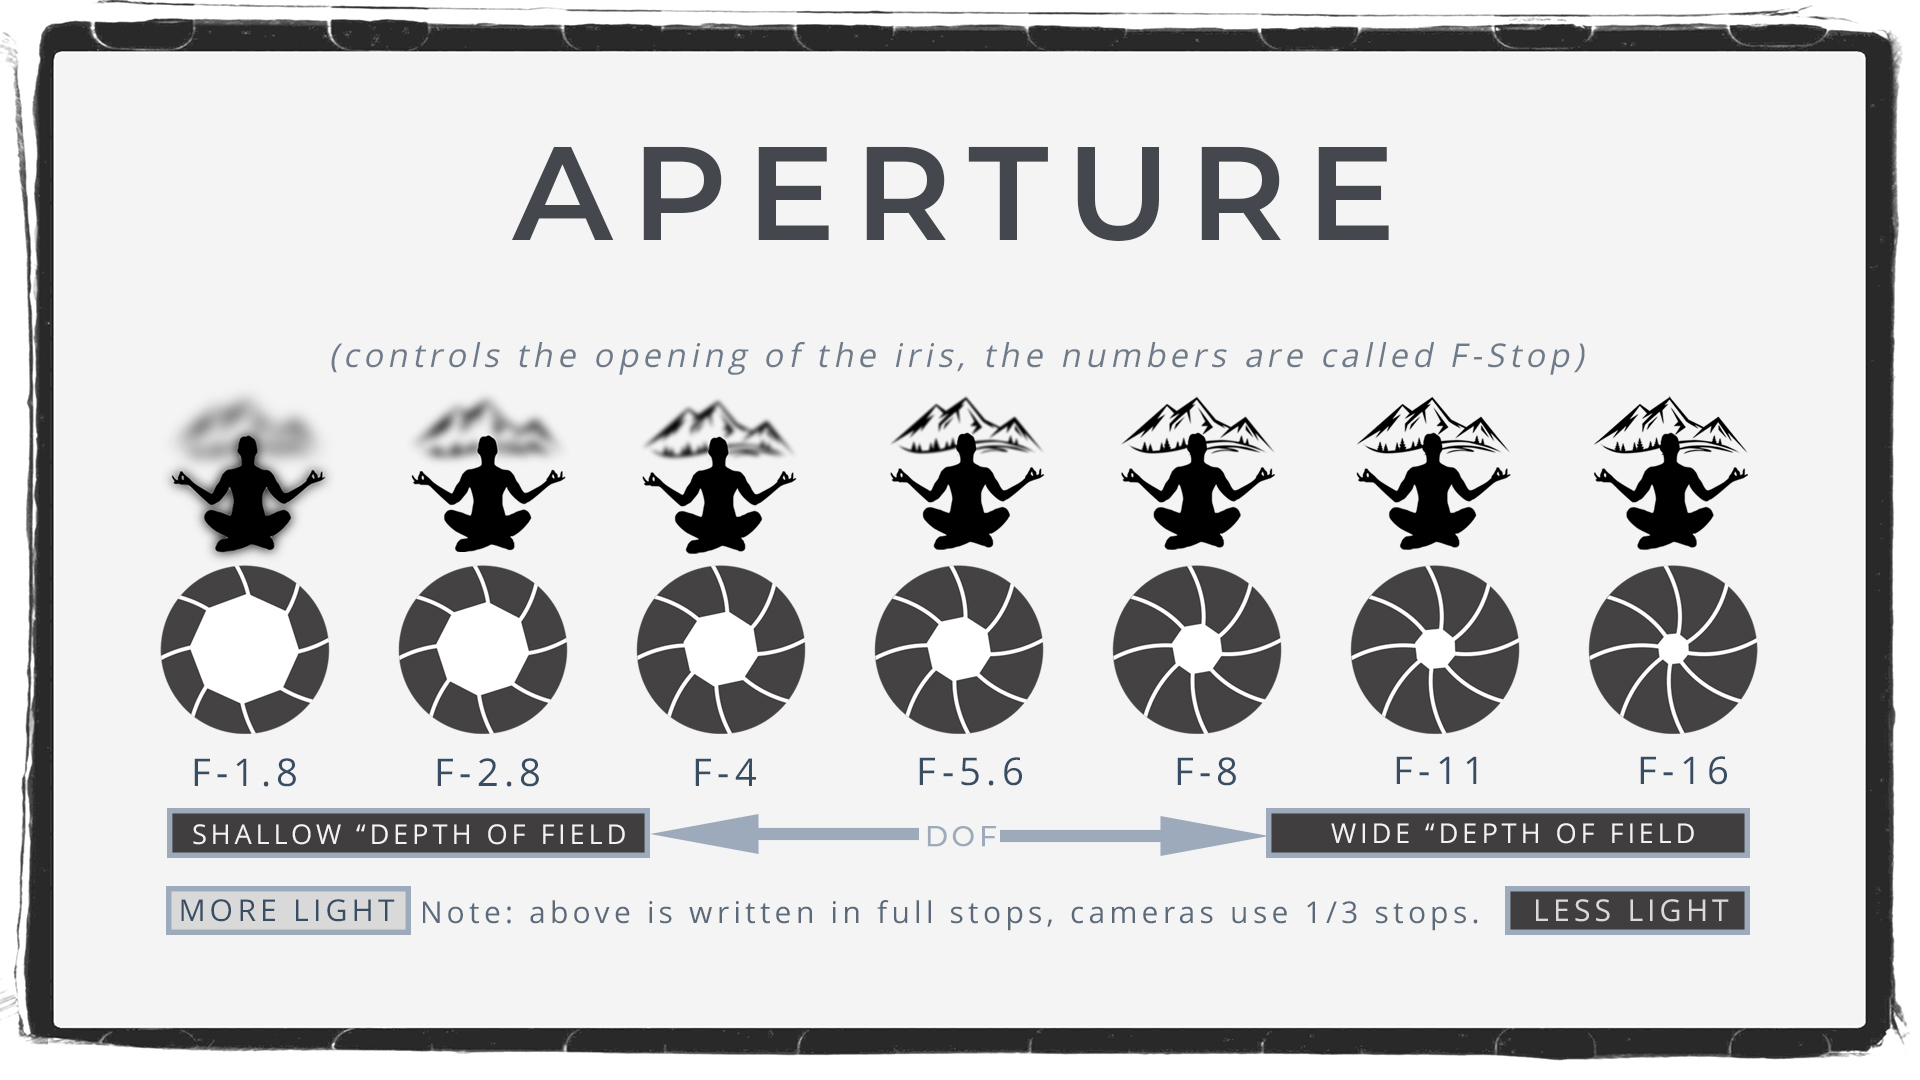 What is Aperture and Why is it Important in Photography<span class="rmp-archive-results-widget "><i class=" rmp-icon rmp-icon--ratings rmp-icon--star rmp-icon--full-highlight"></i><i class=" rmp-icon rmp-icon--ratings rmp-icon--star rmp-icon--full-highlight"></i><i class=" rmp-icon rmp-icon--ratings rmp-icon--star rmp-icon--full-highlight"></i><i class=" rmp-icon rmp-icon--ratings rmp-icon--star rmp-icon--full-highlight"></i><i class=" rmp-icon rmp-icon--ratings rmp-icon--star rmp-icon--full-highlight"></i> <span>5 (1)</span></span>